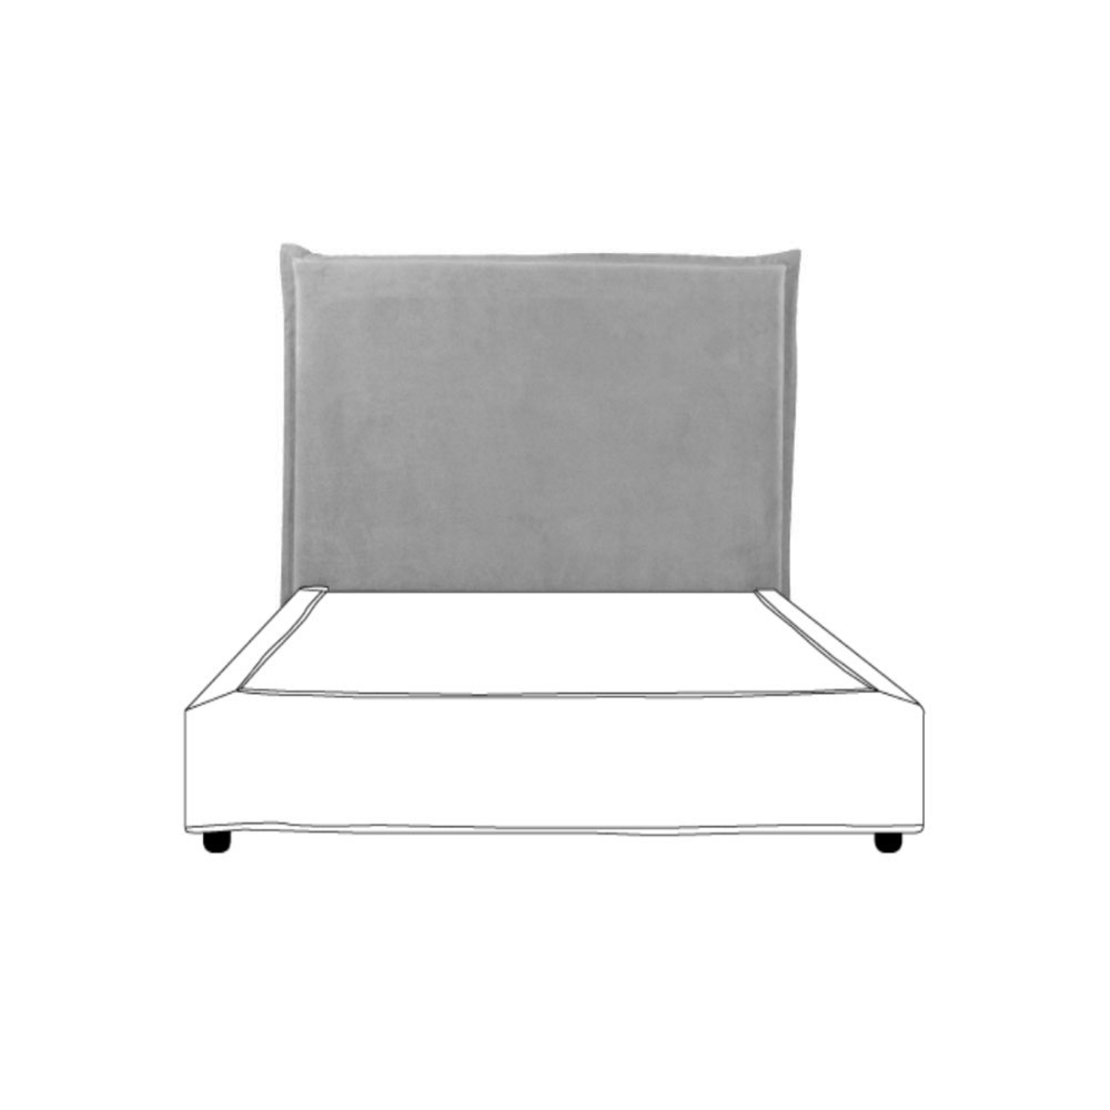 CITY 120 HEADBOARD AND BASE FABRIC SOLID WOOD PINE GREY CHIPBOARD E1 GR